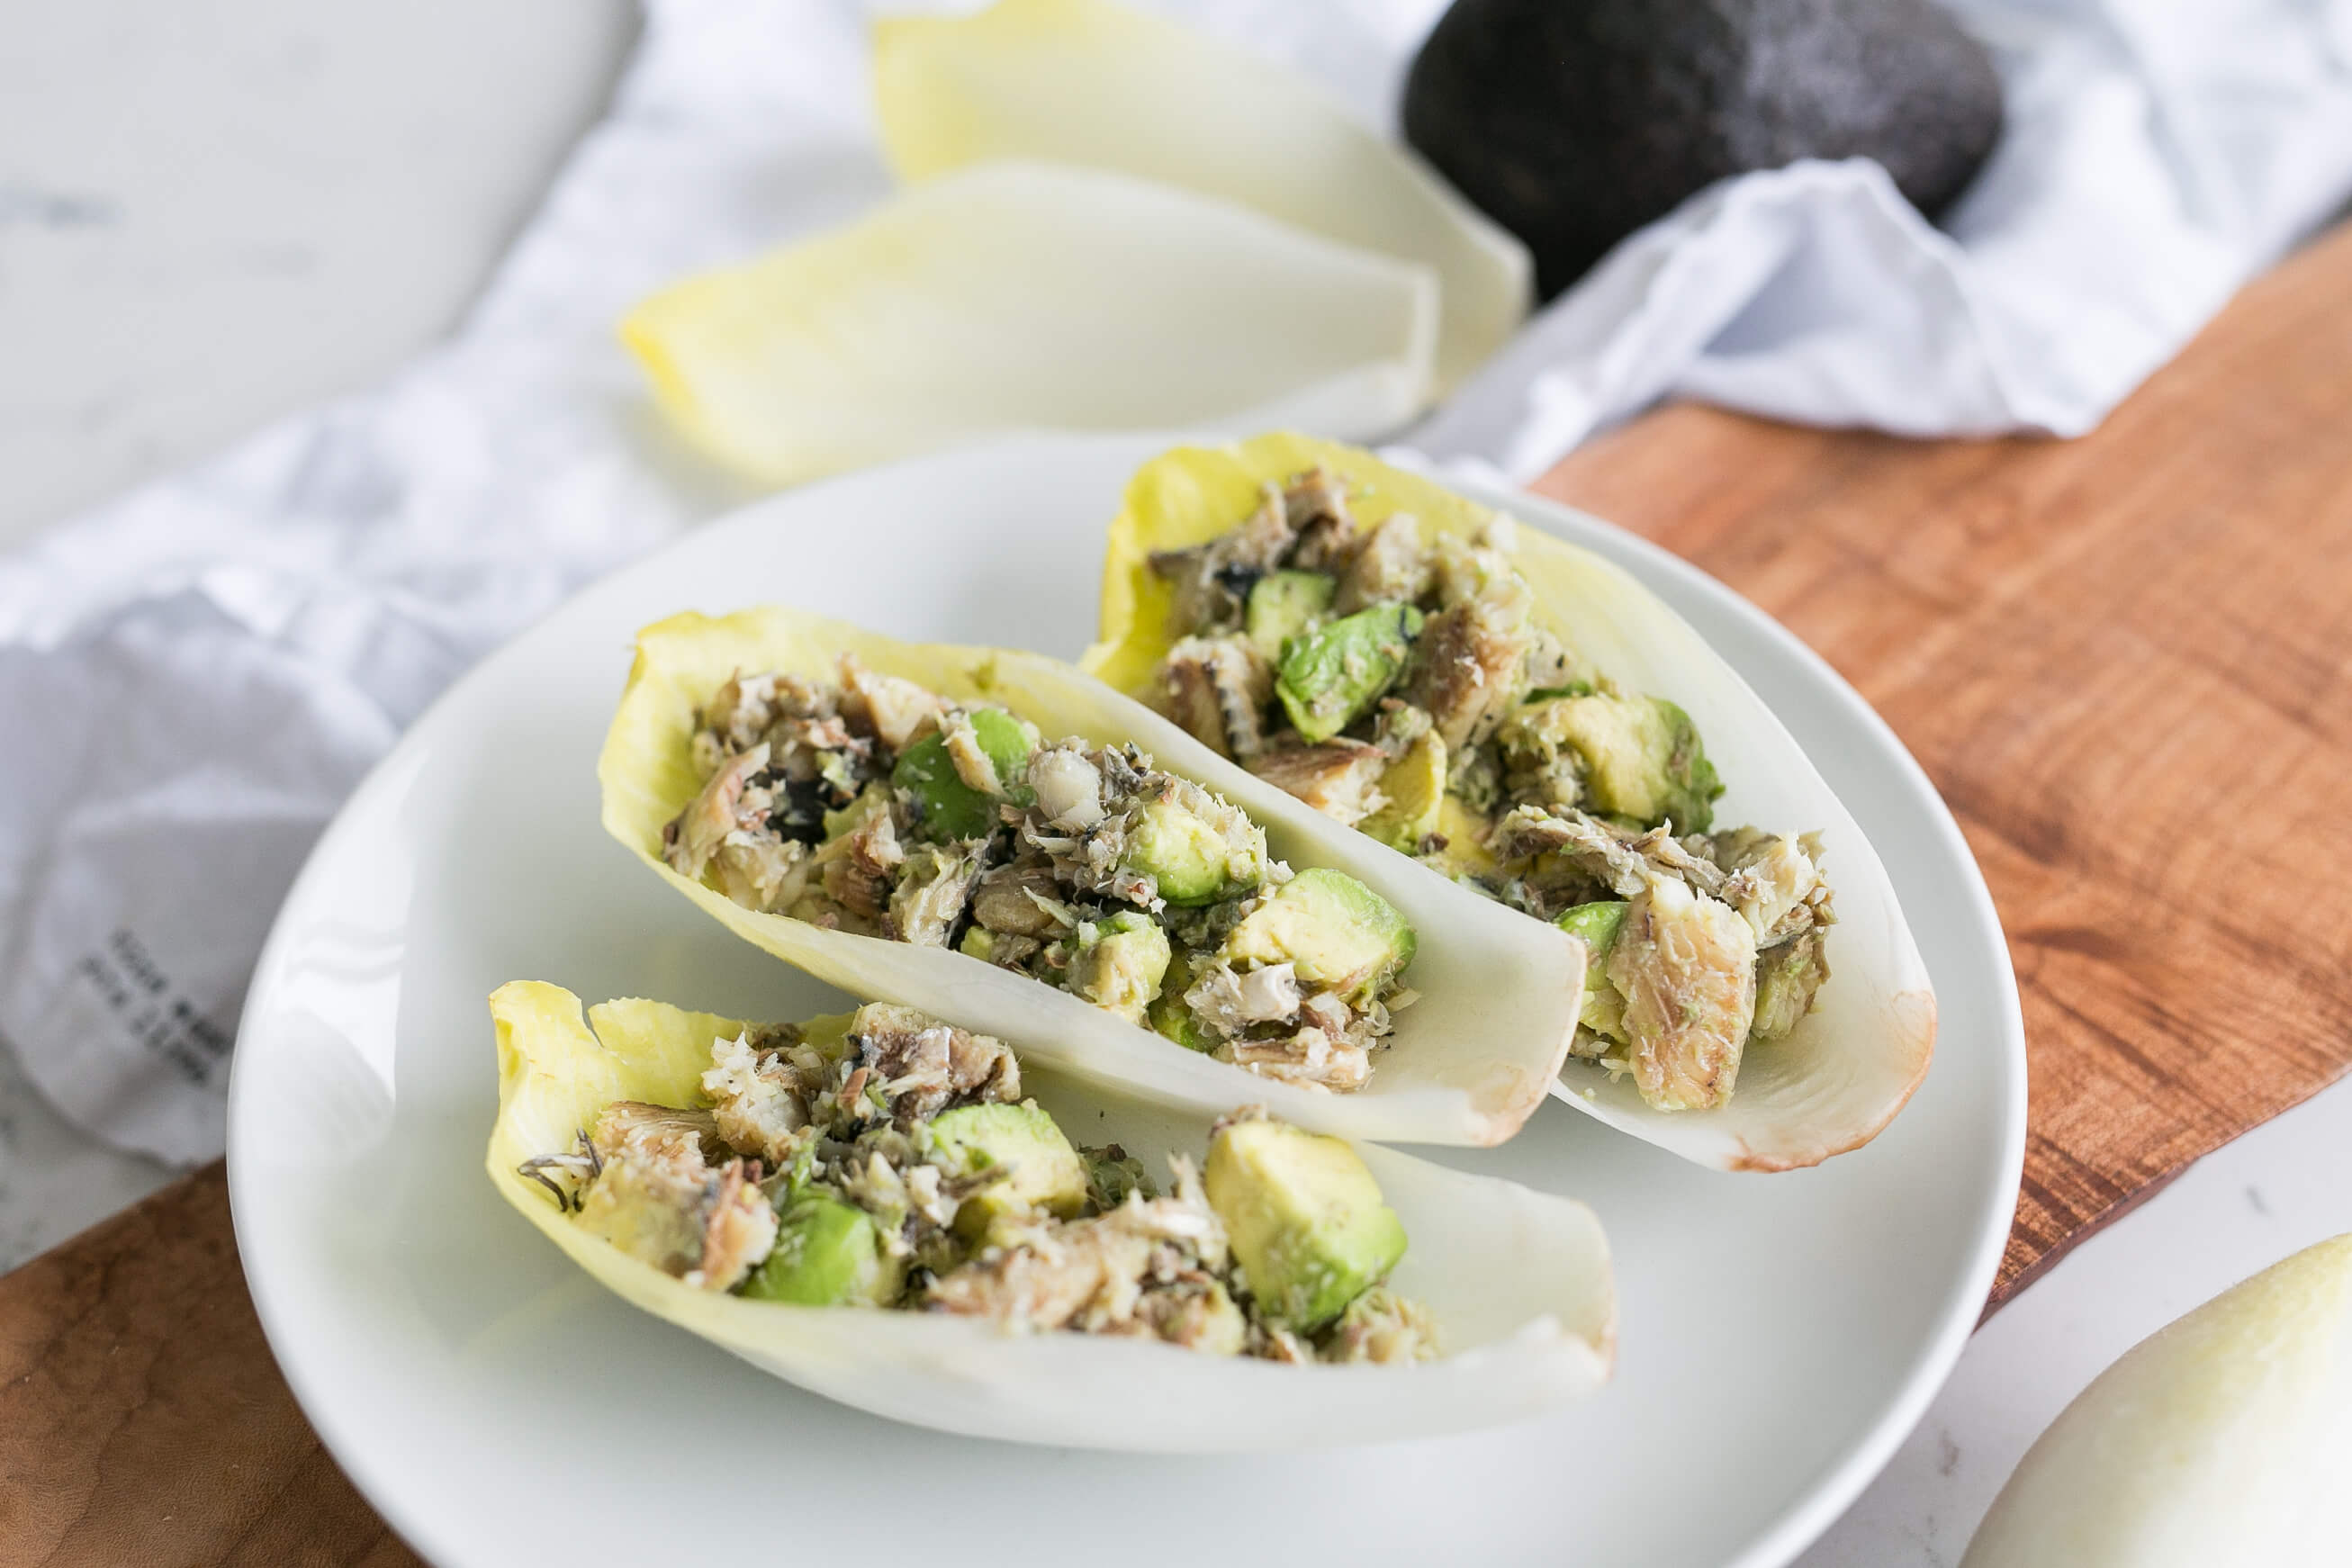 20 Specific Carbohydrate Diet Meals to Help Clients With Inflammatory Bowel Disease:Sardine & Avocado Endive Wraps